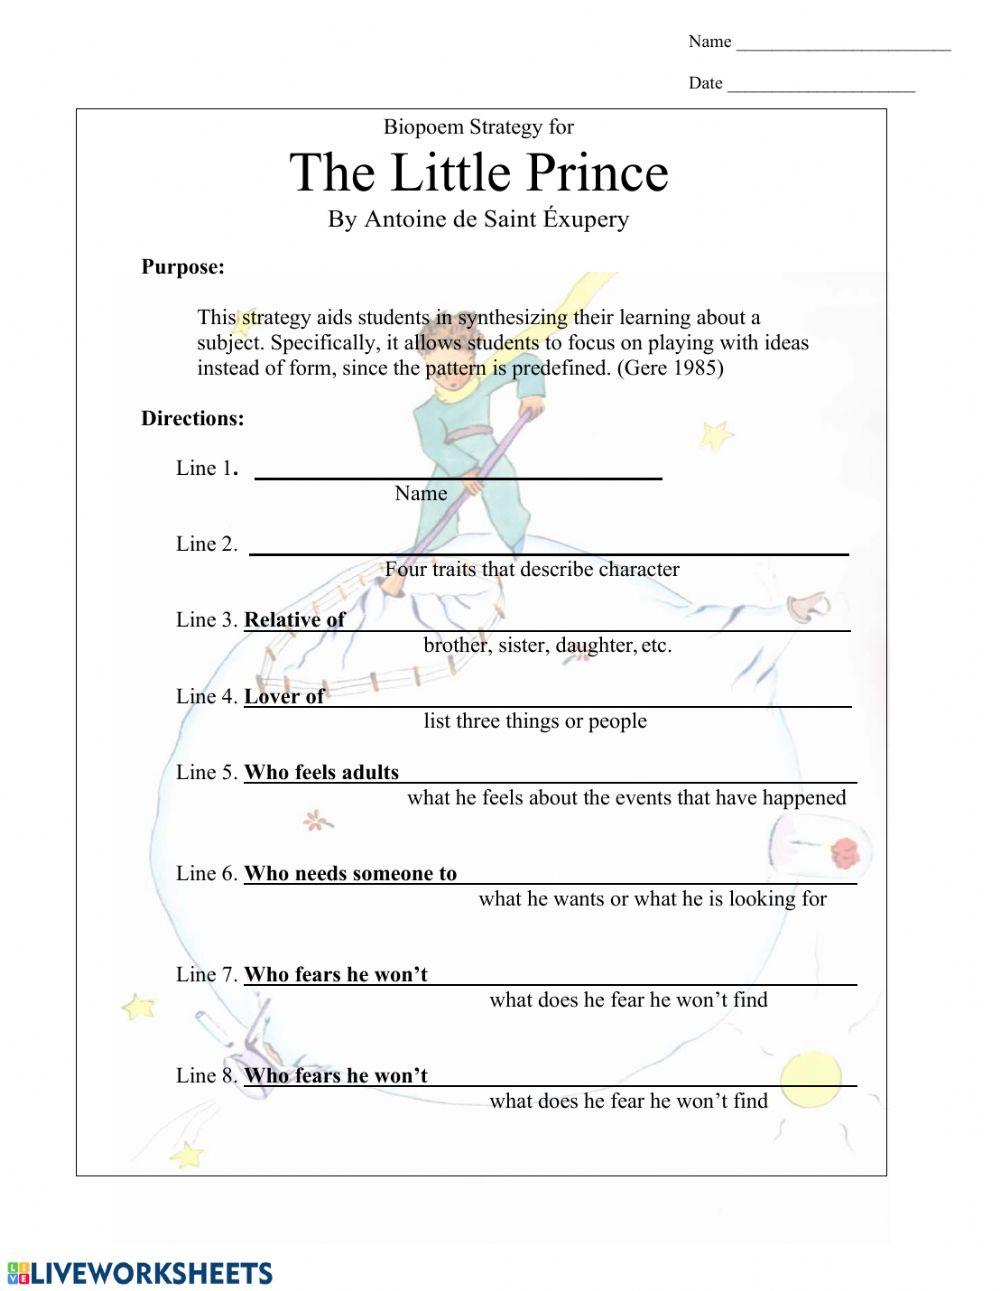 The Little Prince BioPoem